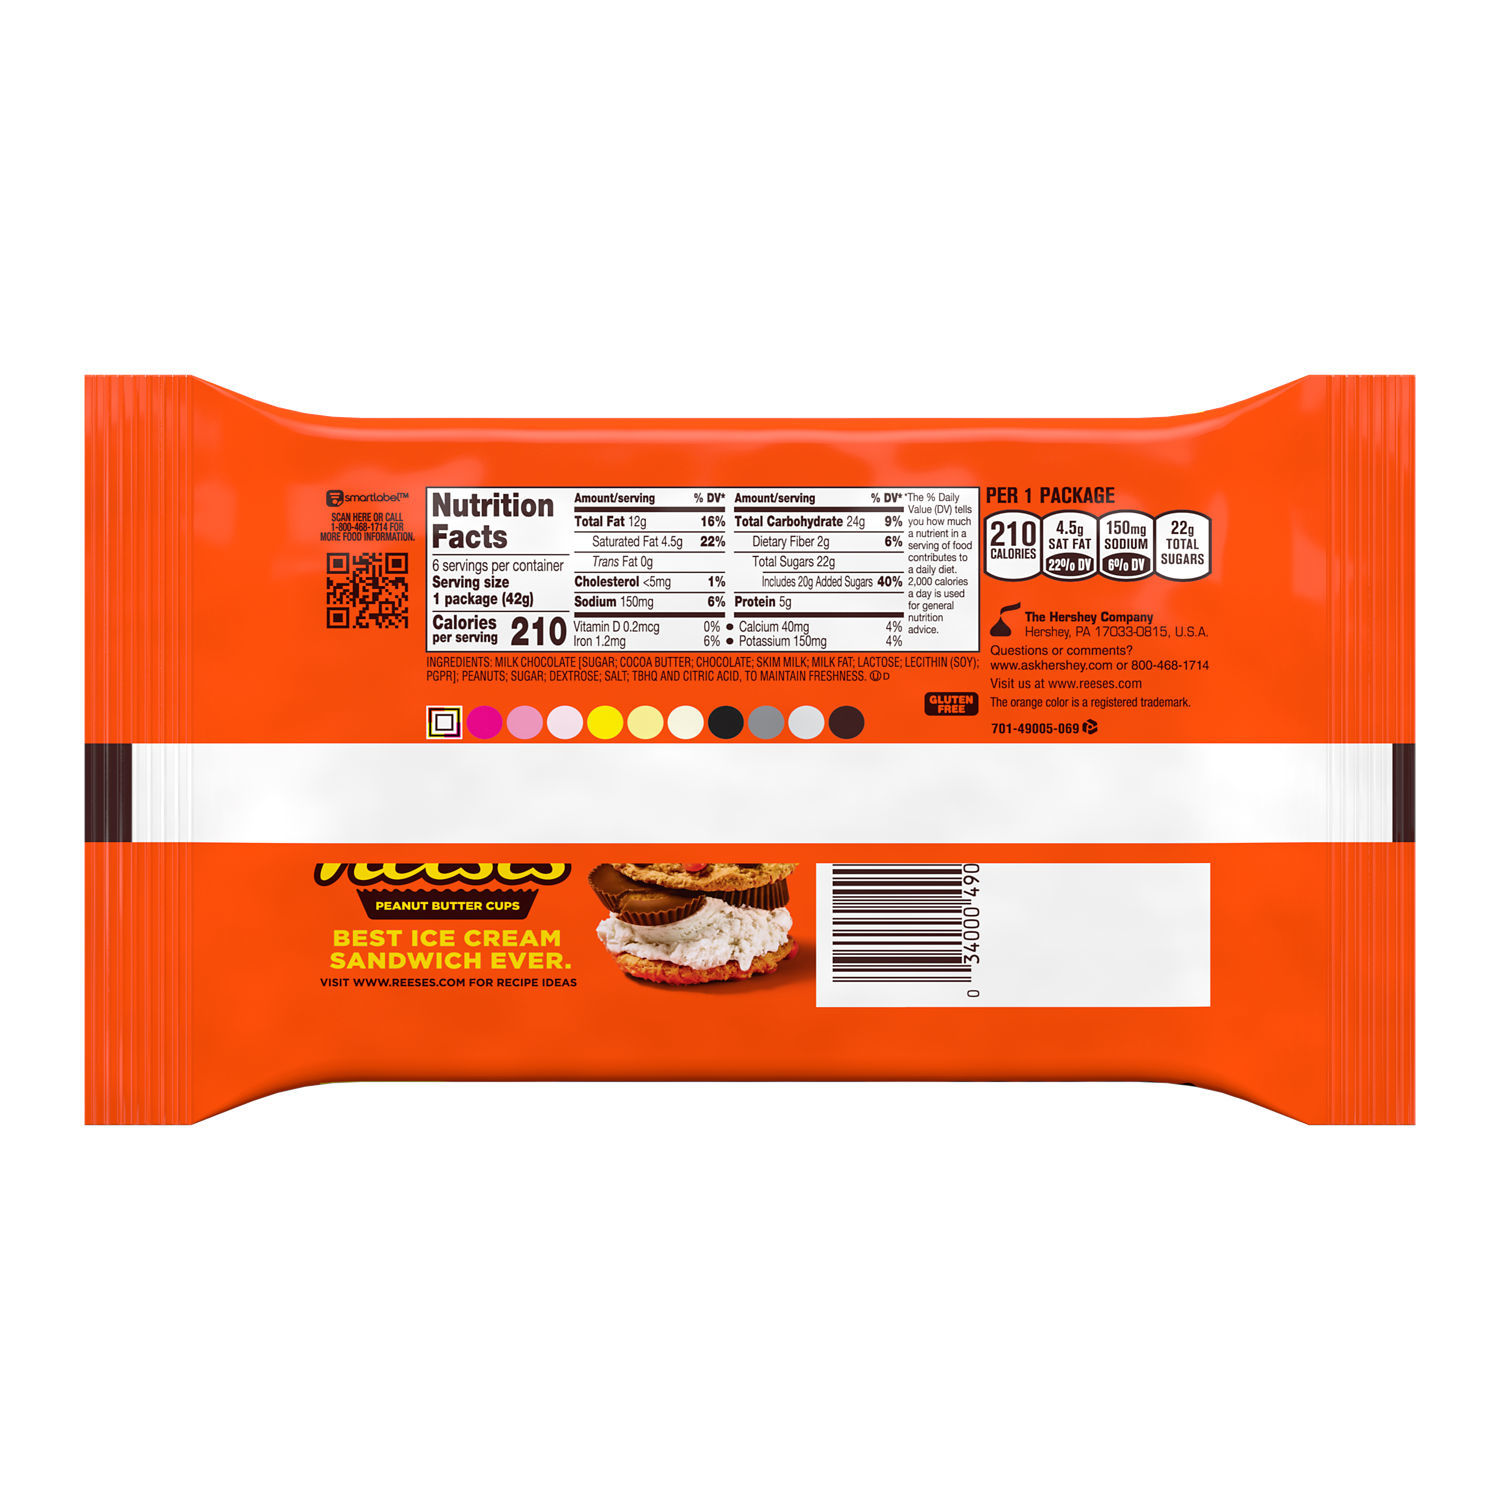 Reese's Milk Chocolate Peanut Butter Cups Candy, Packs 1.5 oz, 6 Count - image 3 of 9